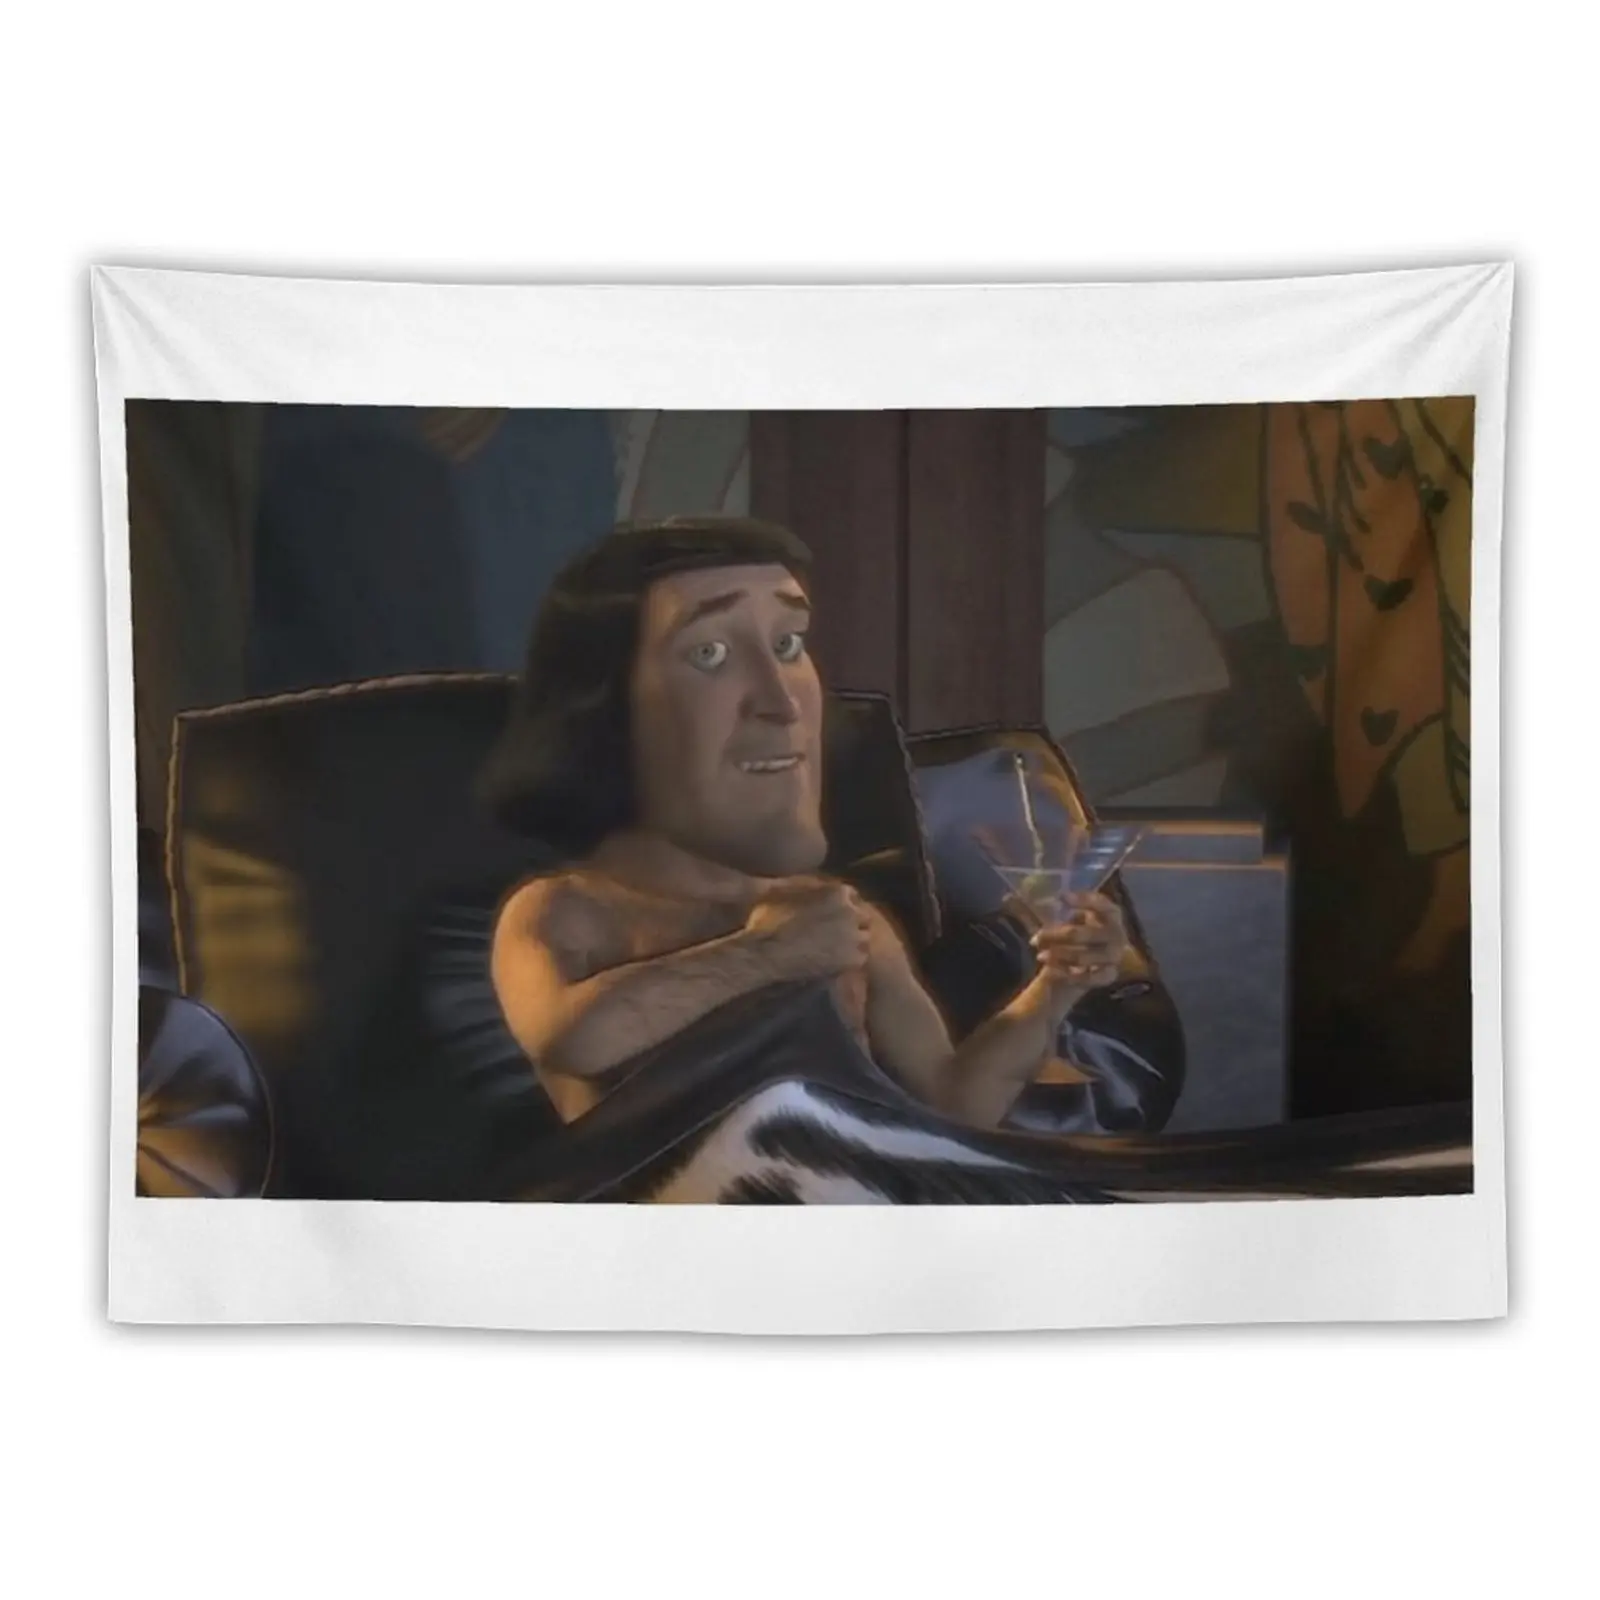 

naughty farquaad Tapestry Aesthetic Room Decor Decorative Wall Murals Home Decoration Accessories Room Ornaments Tapestry